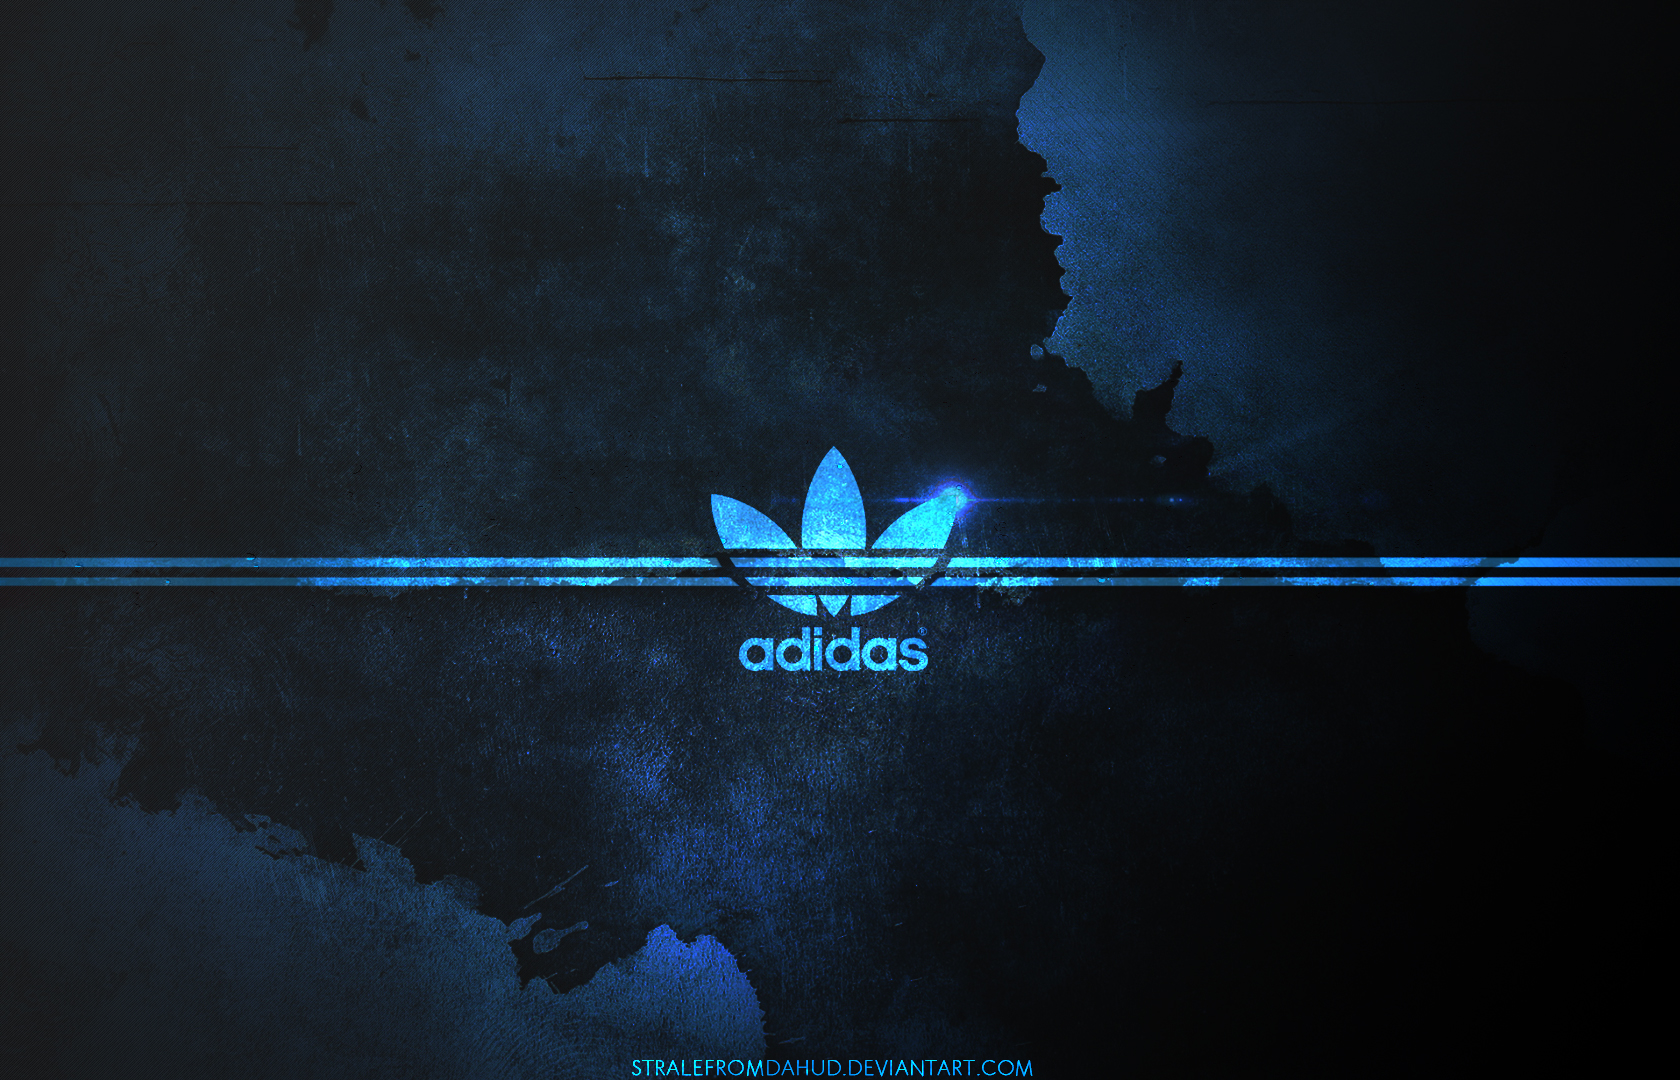 Adidas Wallpaper By Stralefromdahud